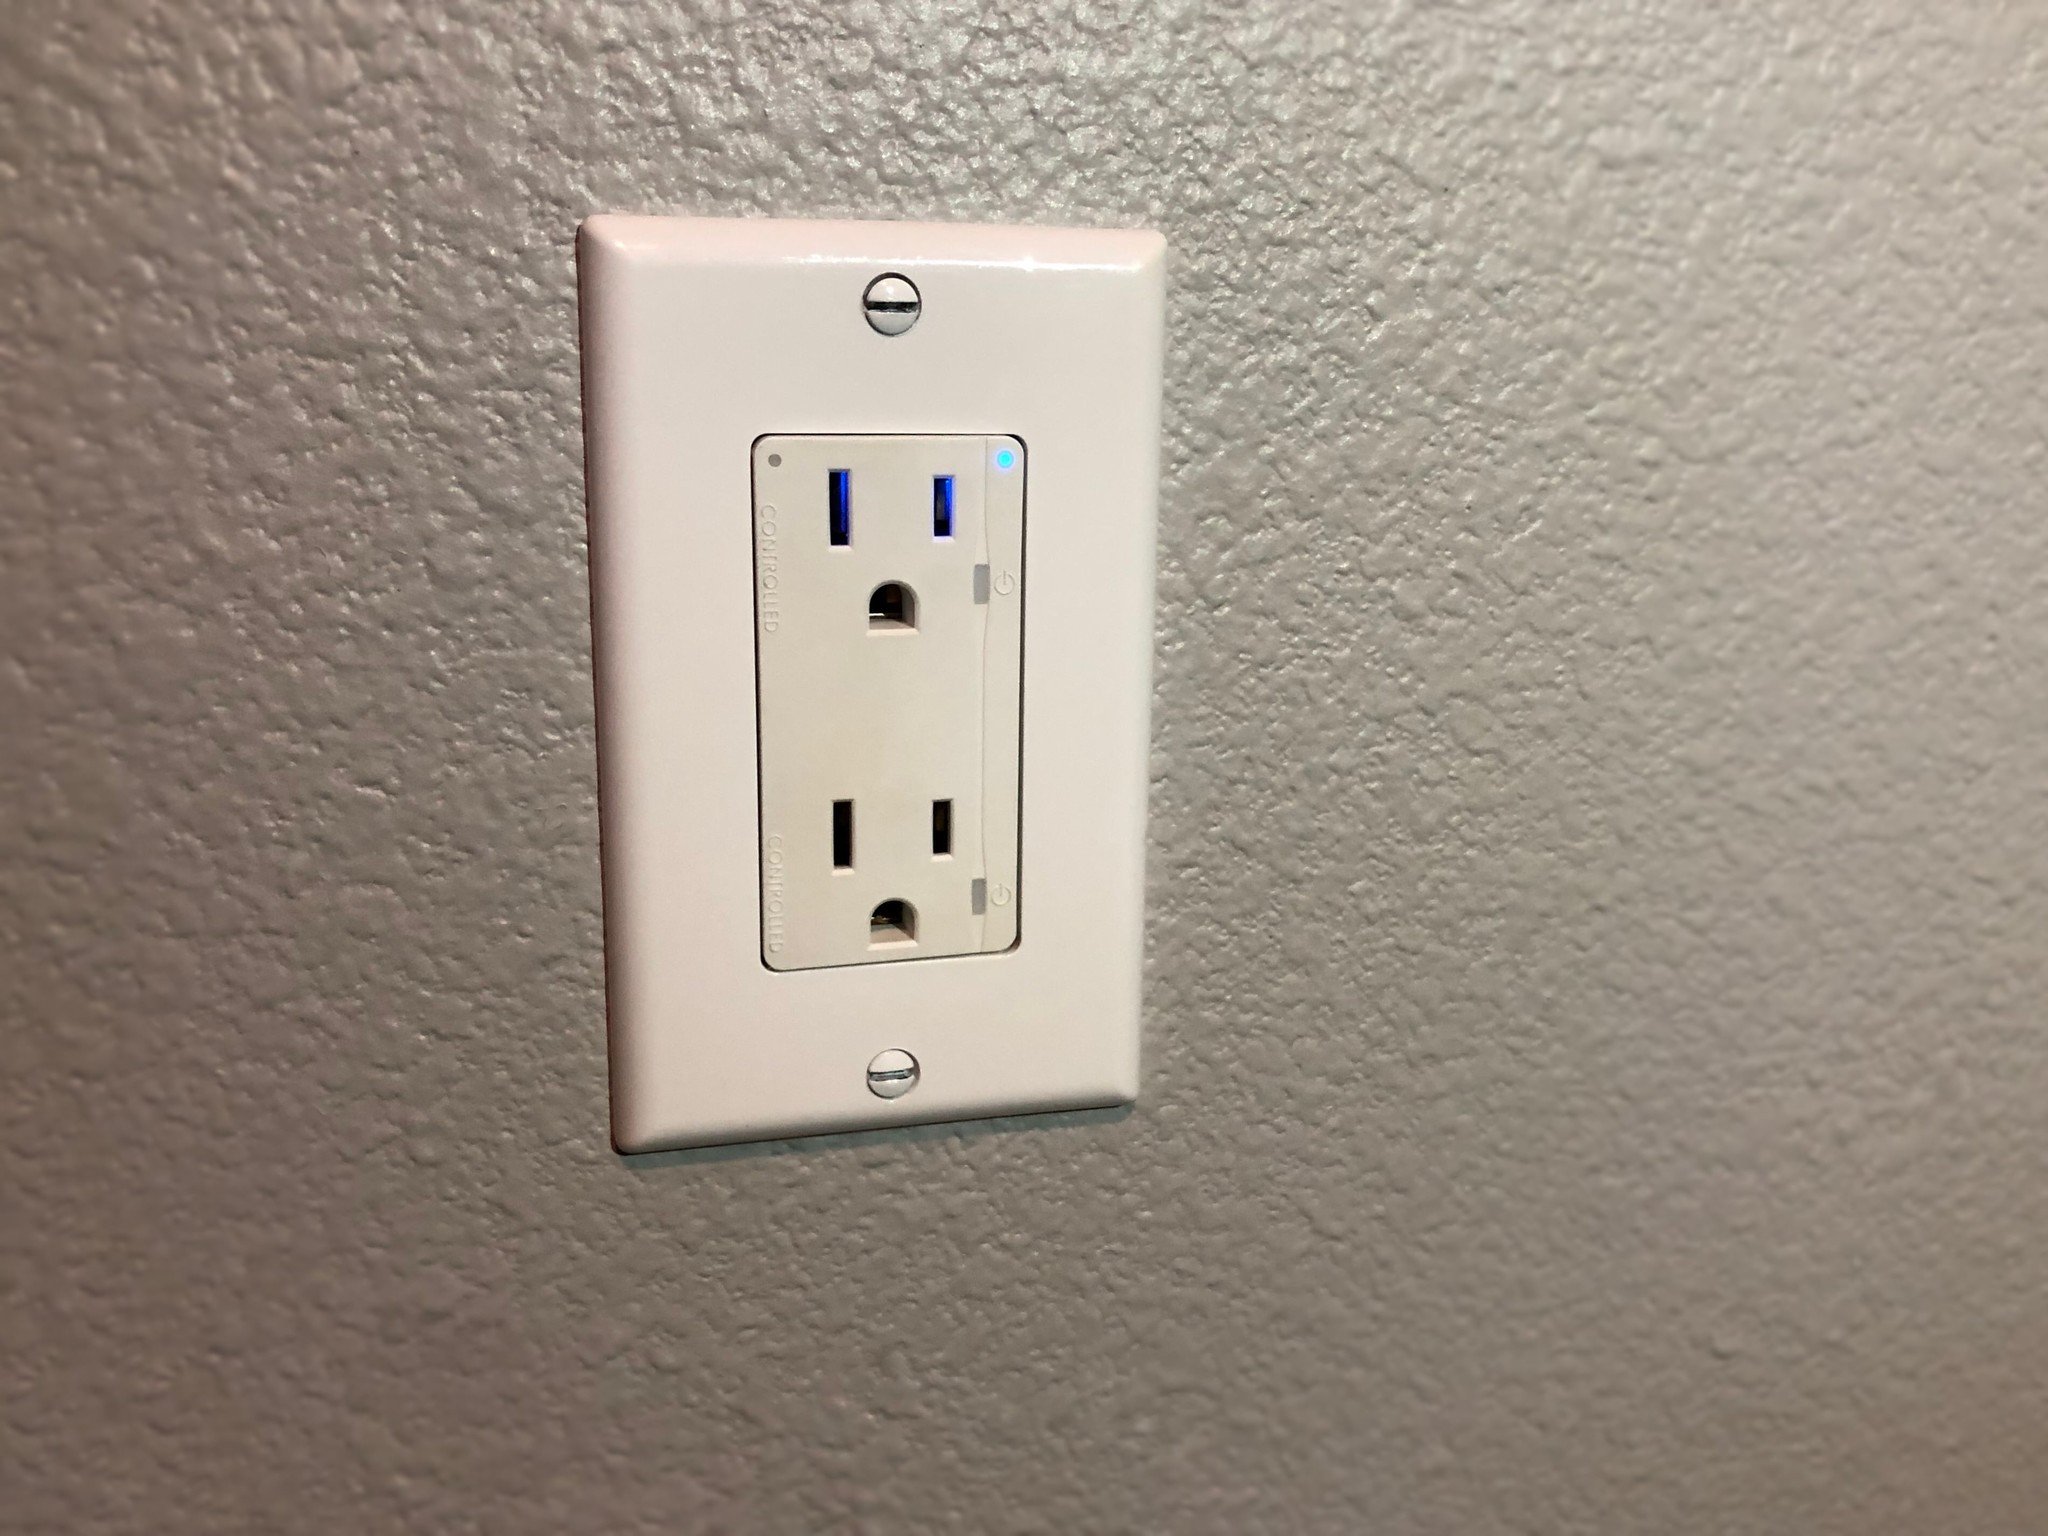 Connectsense Smart Inwall Outlet on a gray wall